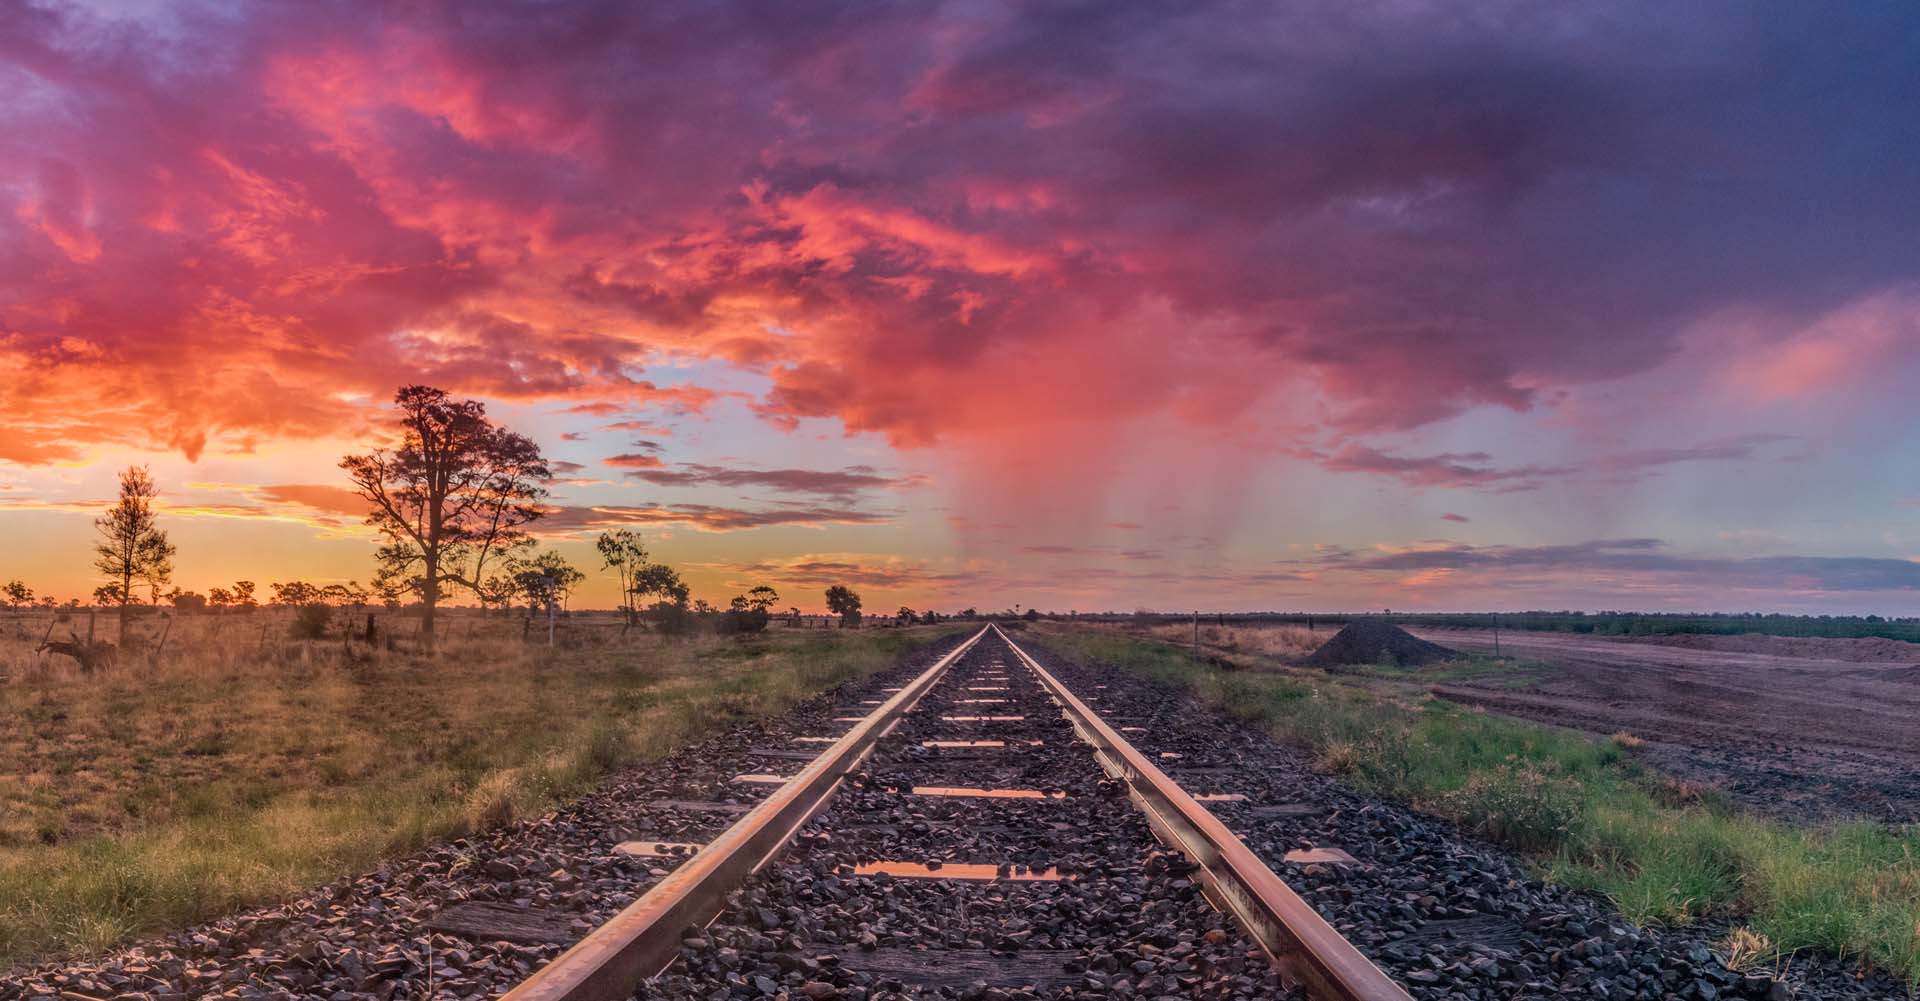 Train tracks going off into the distance across an arid landscape with a red and purple sunset.